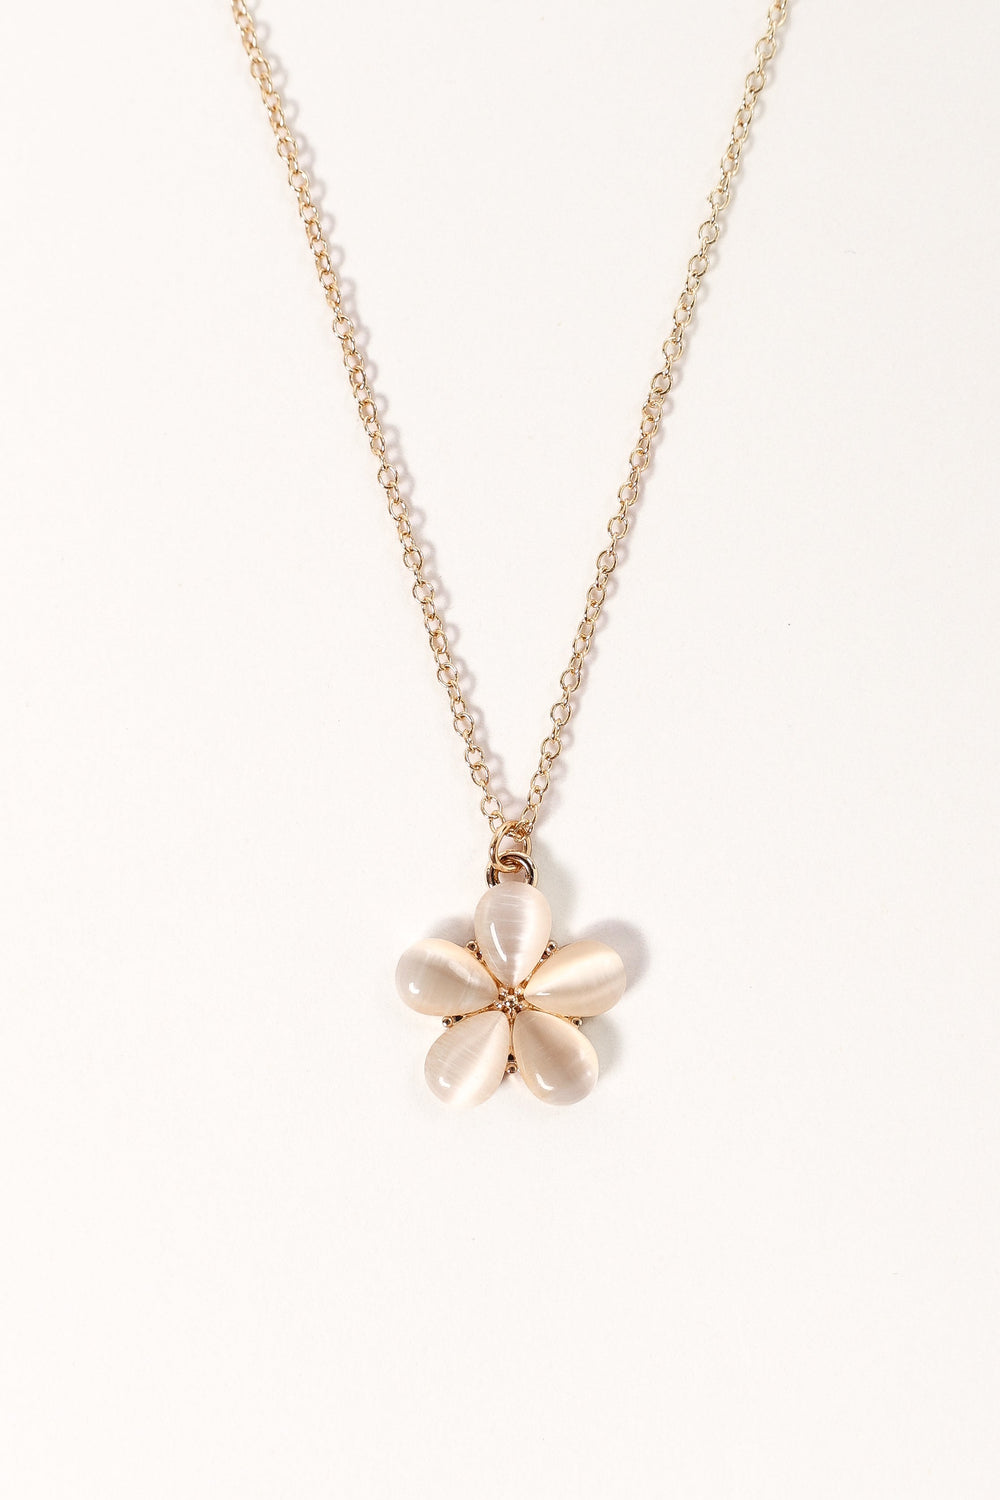 Petal and Pup USA ACCESSORIES Everlee Floral Necklace - Gold One Size